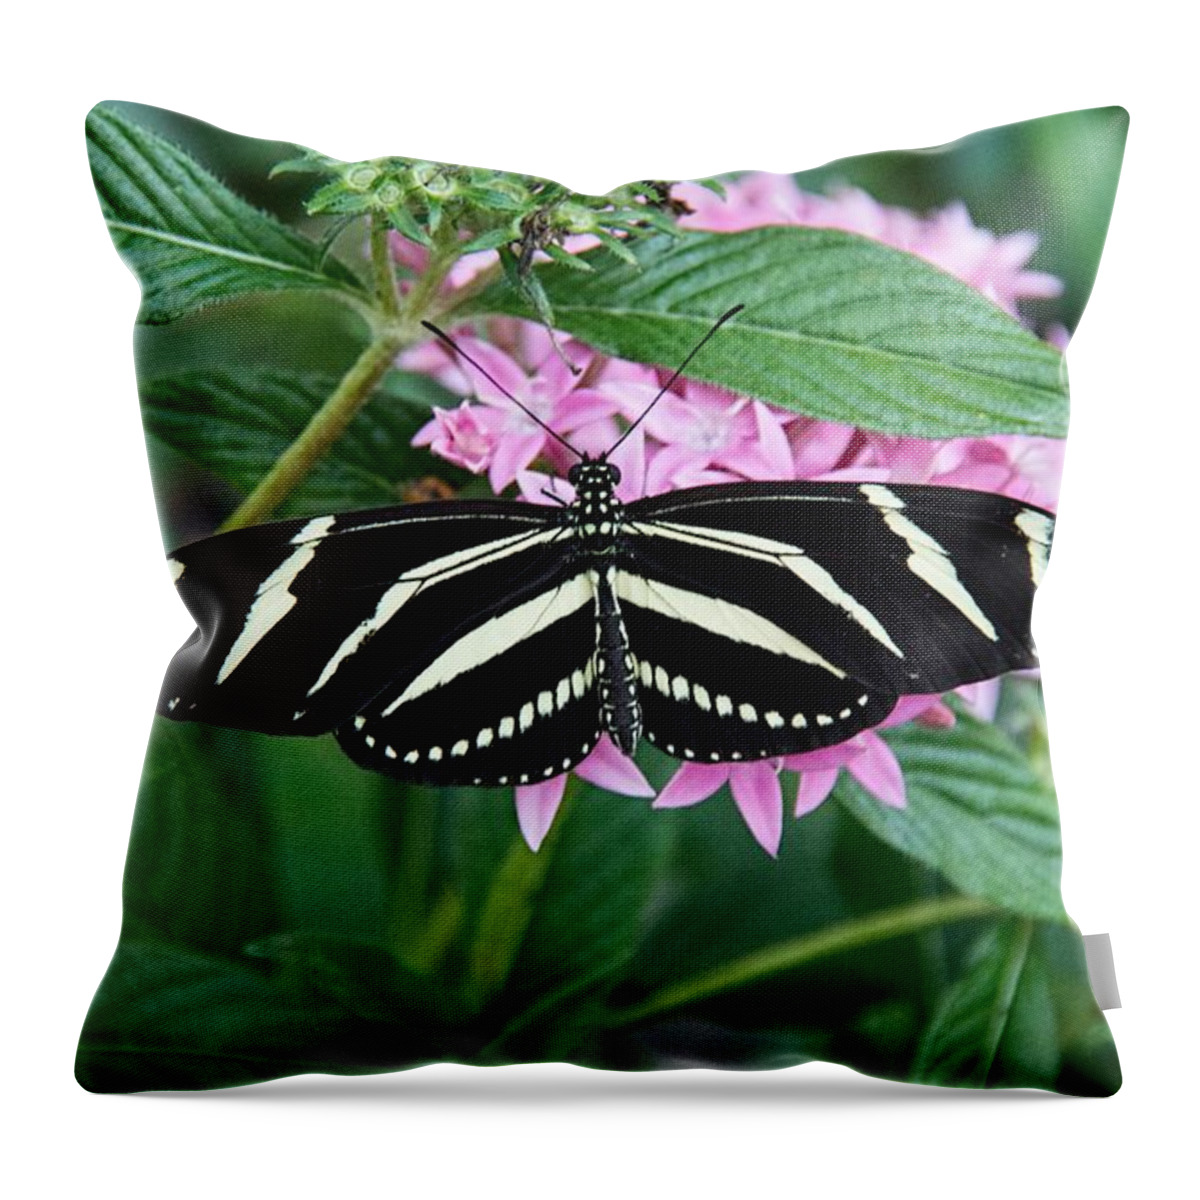 Zebra Throw Pillow featuring the photograph Zebra Longwing Butterfly by John Black